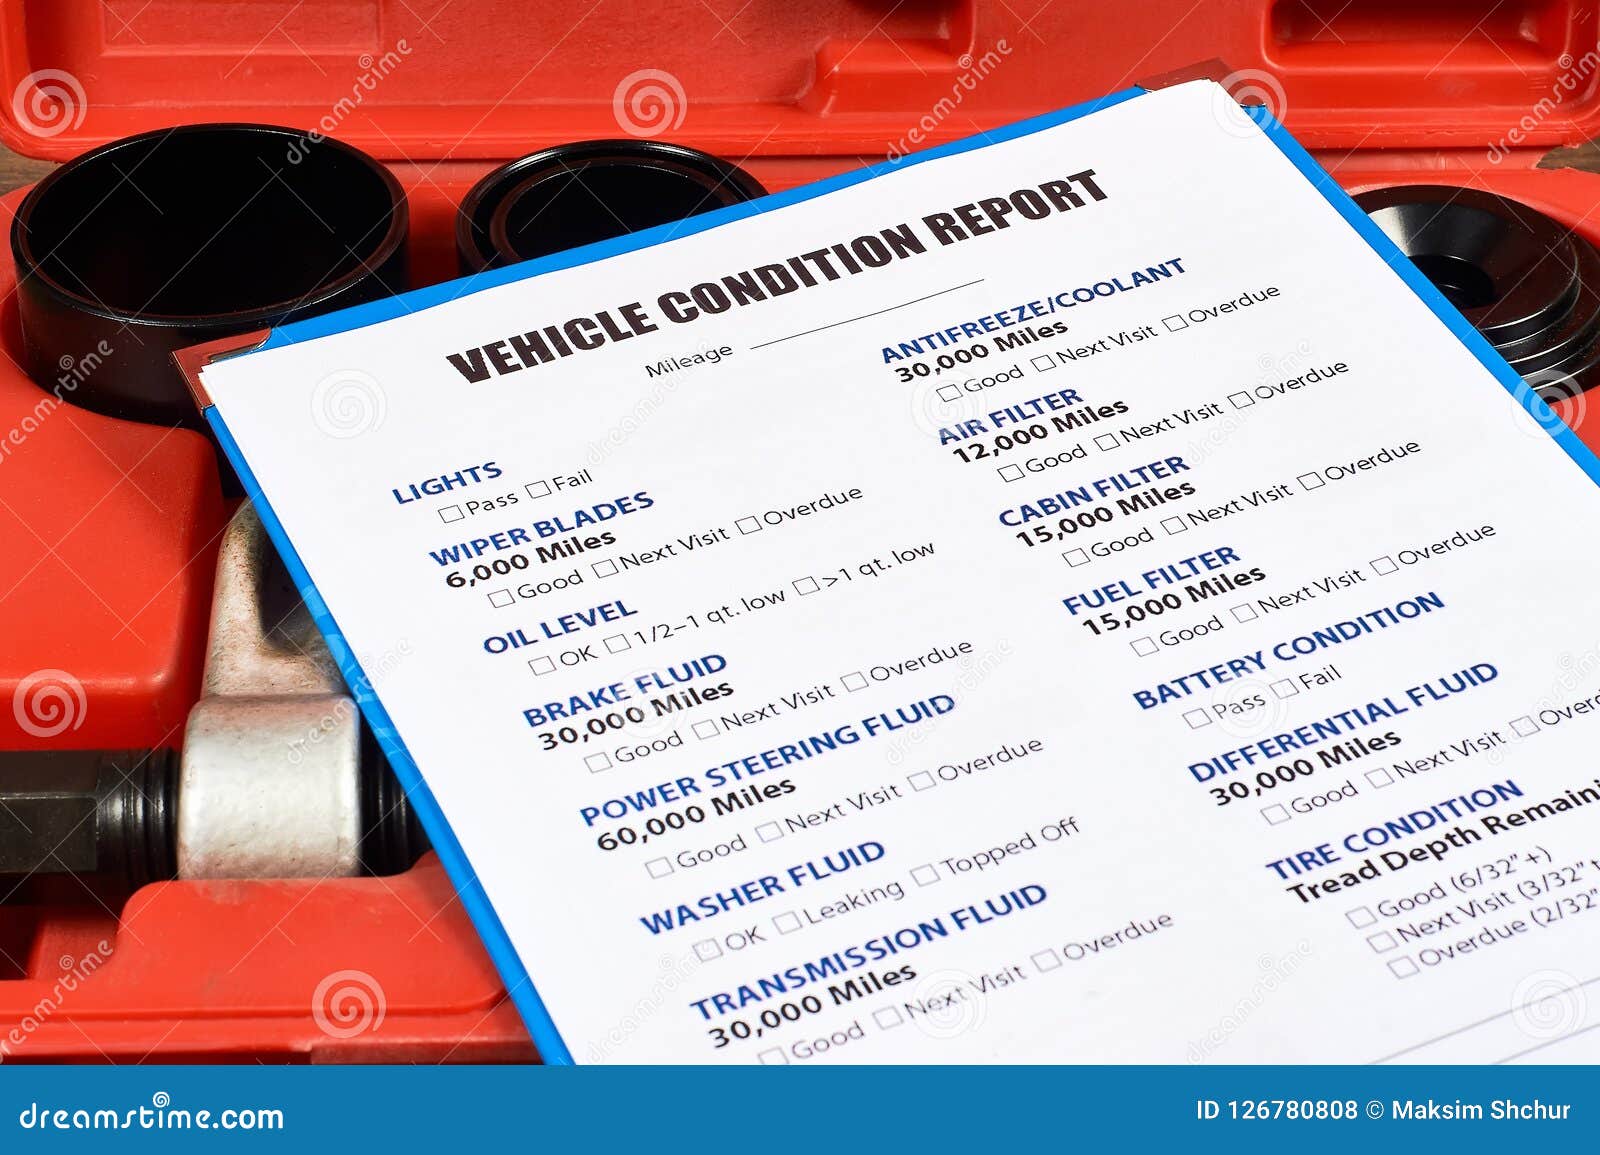 Vehicle Condition Report Form Stock Photo - Image of industry Inside Truck Condition Report Template